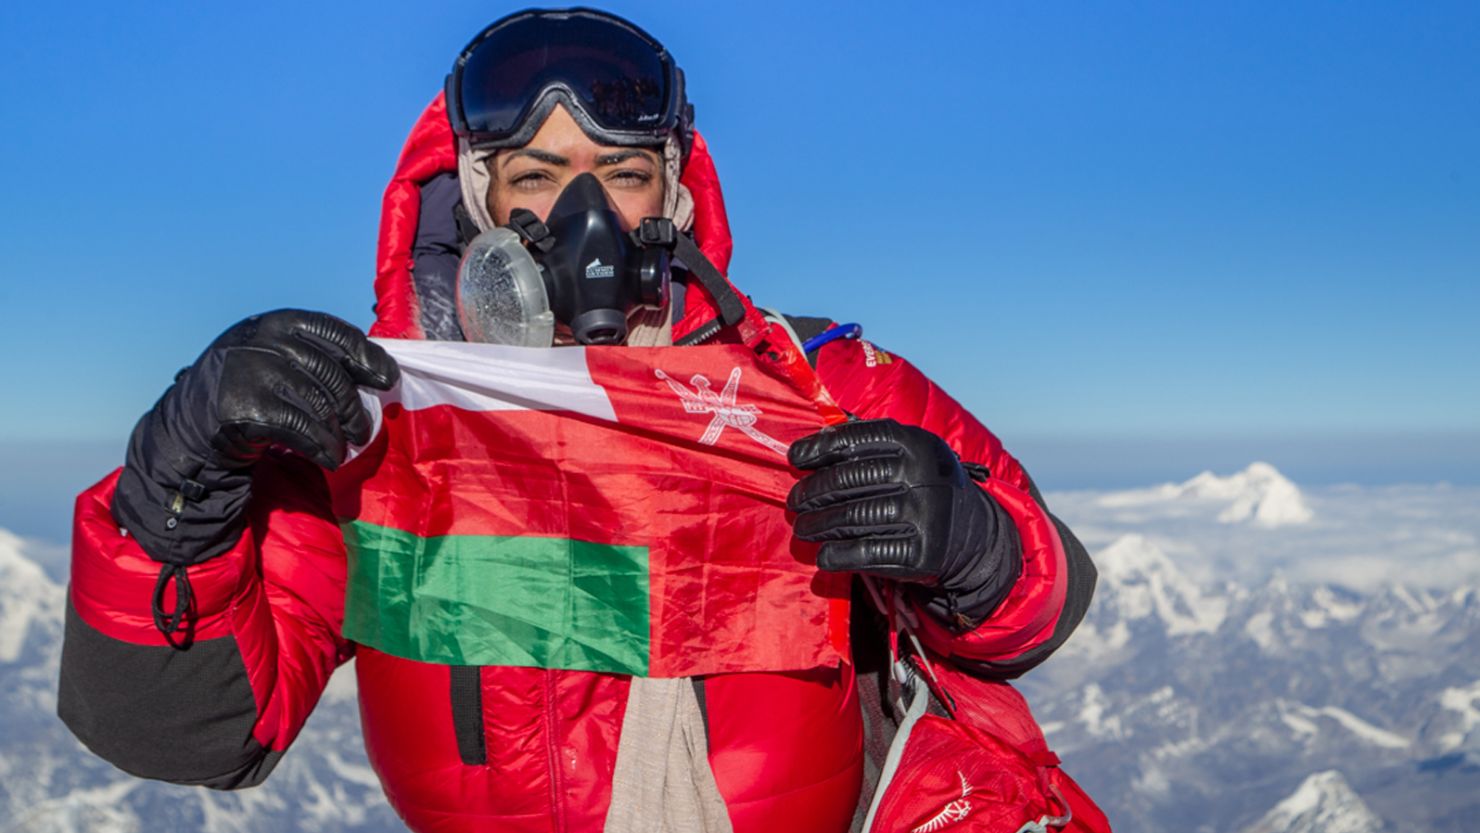 Nadhira Alharthy became the first Omani woman to summit Everest in 2019.